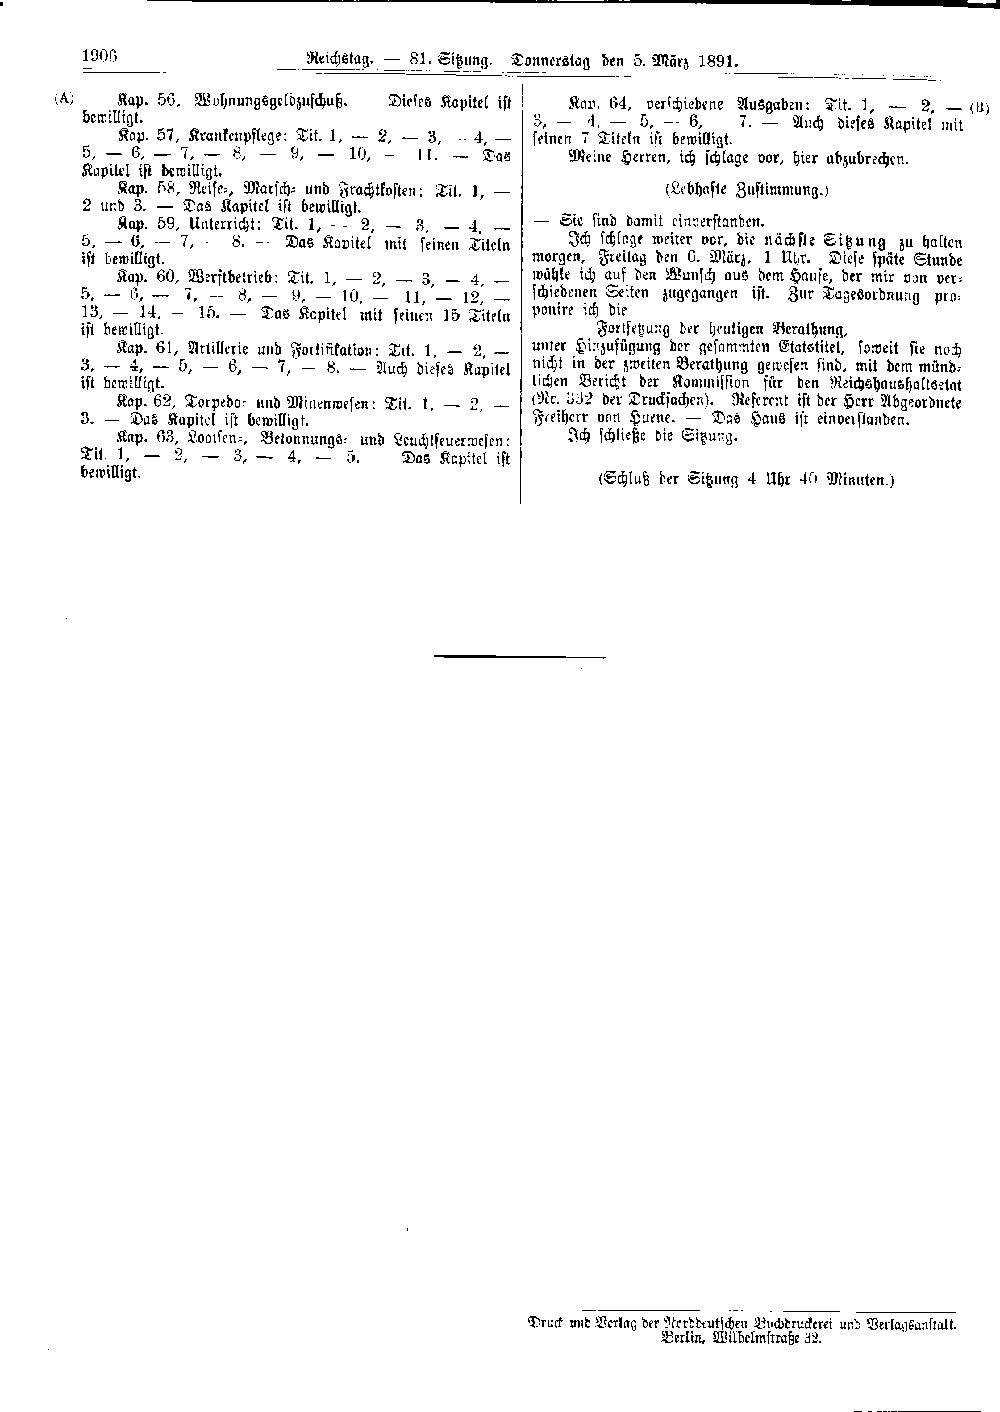 Scan of page 1906